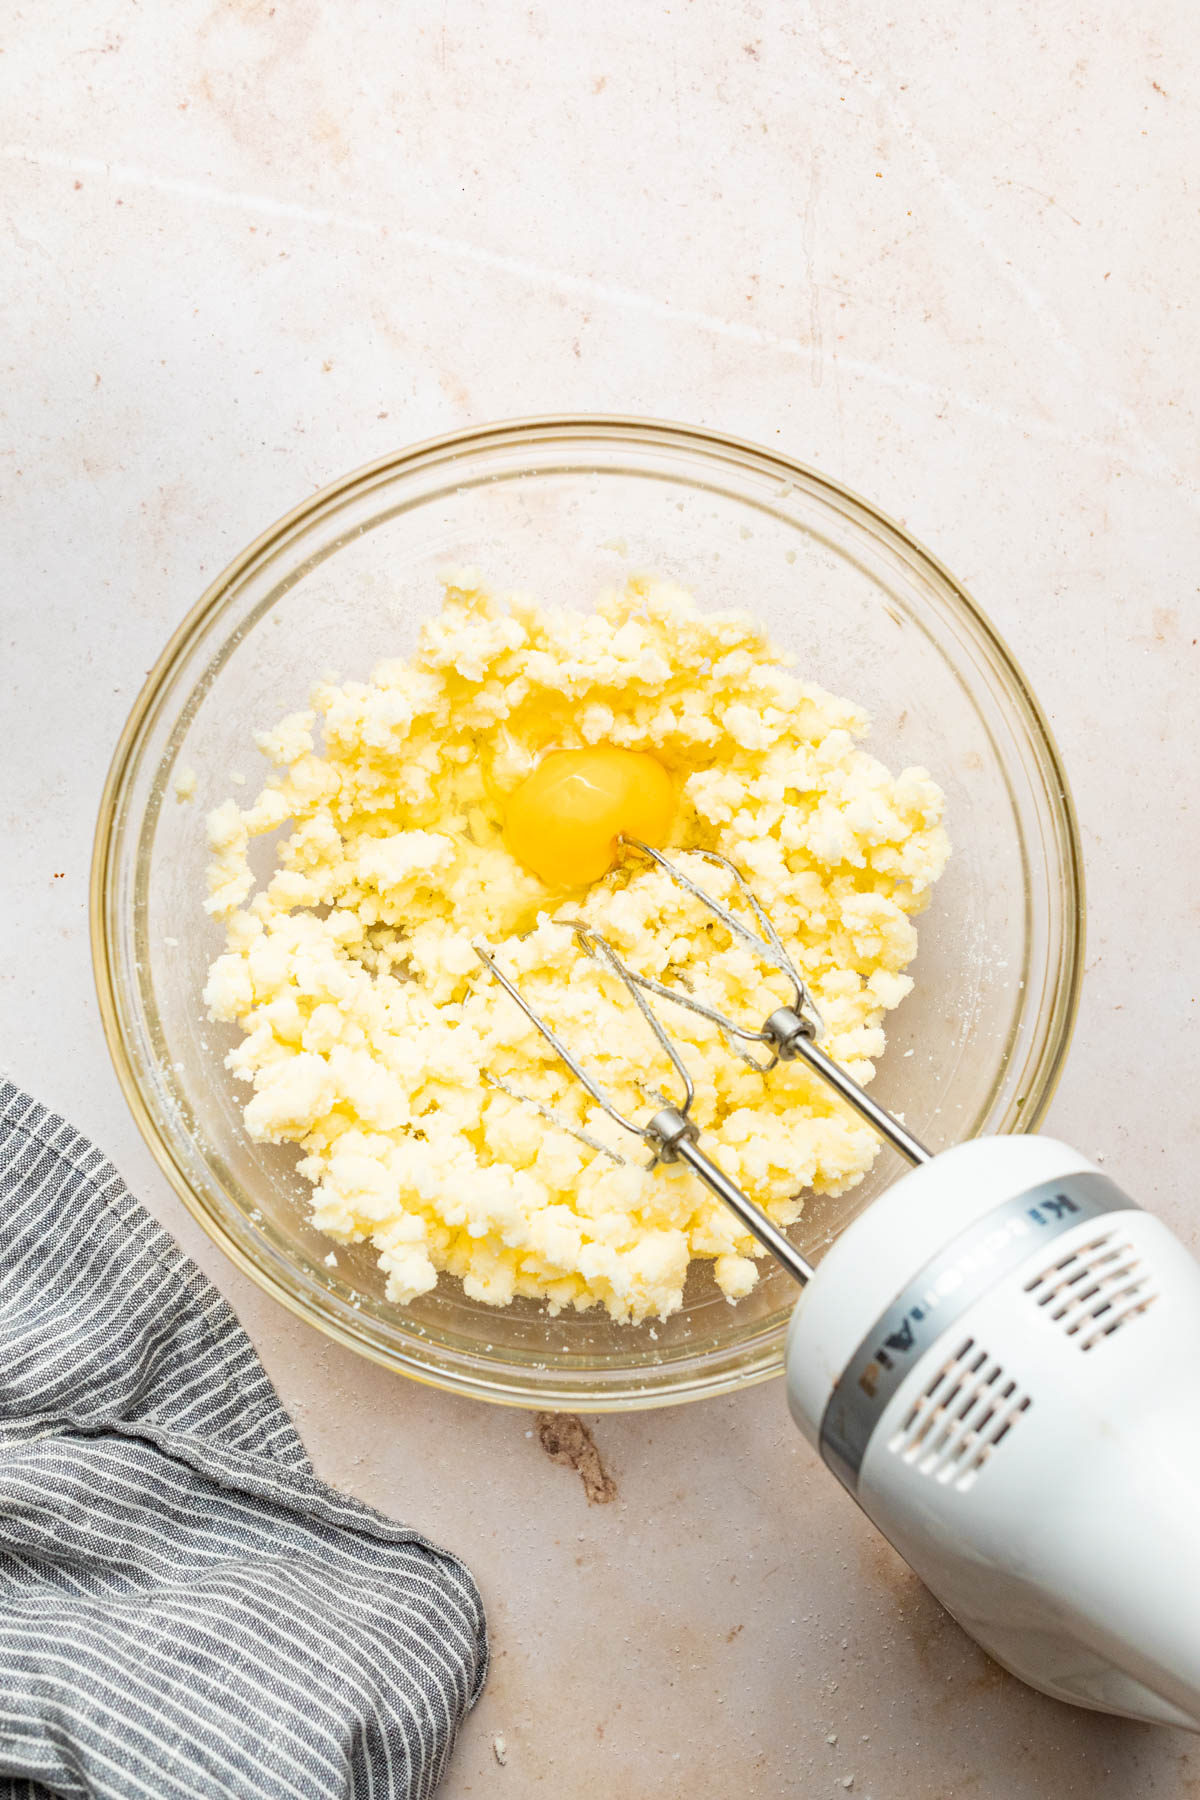 Egg added to butter mixture.